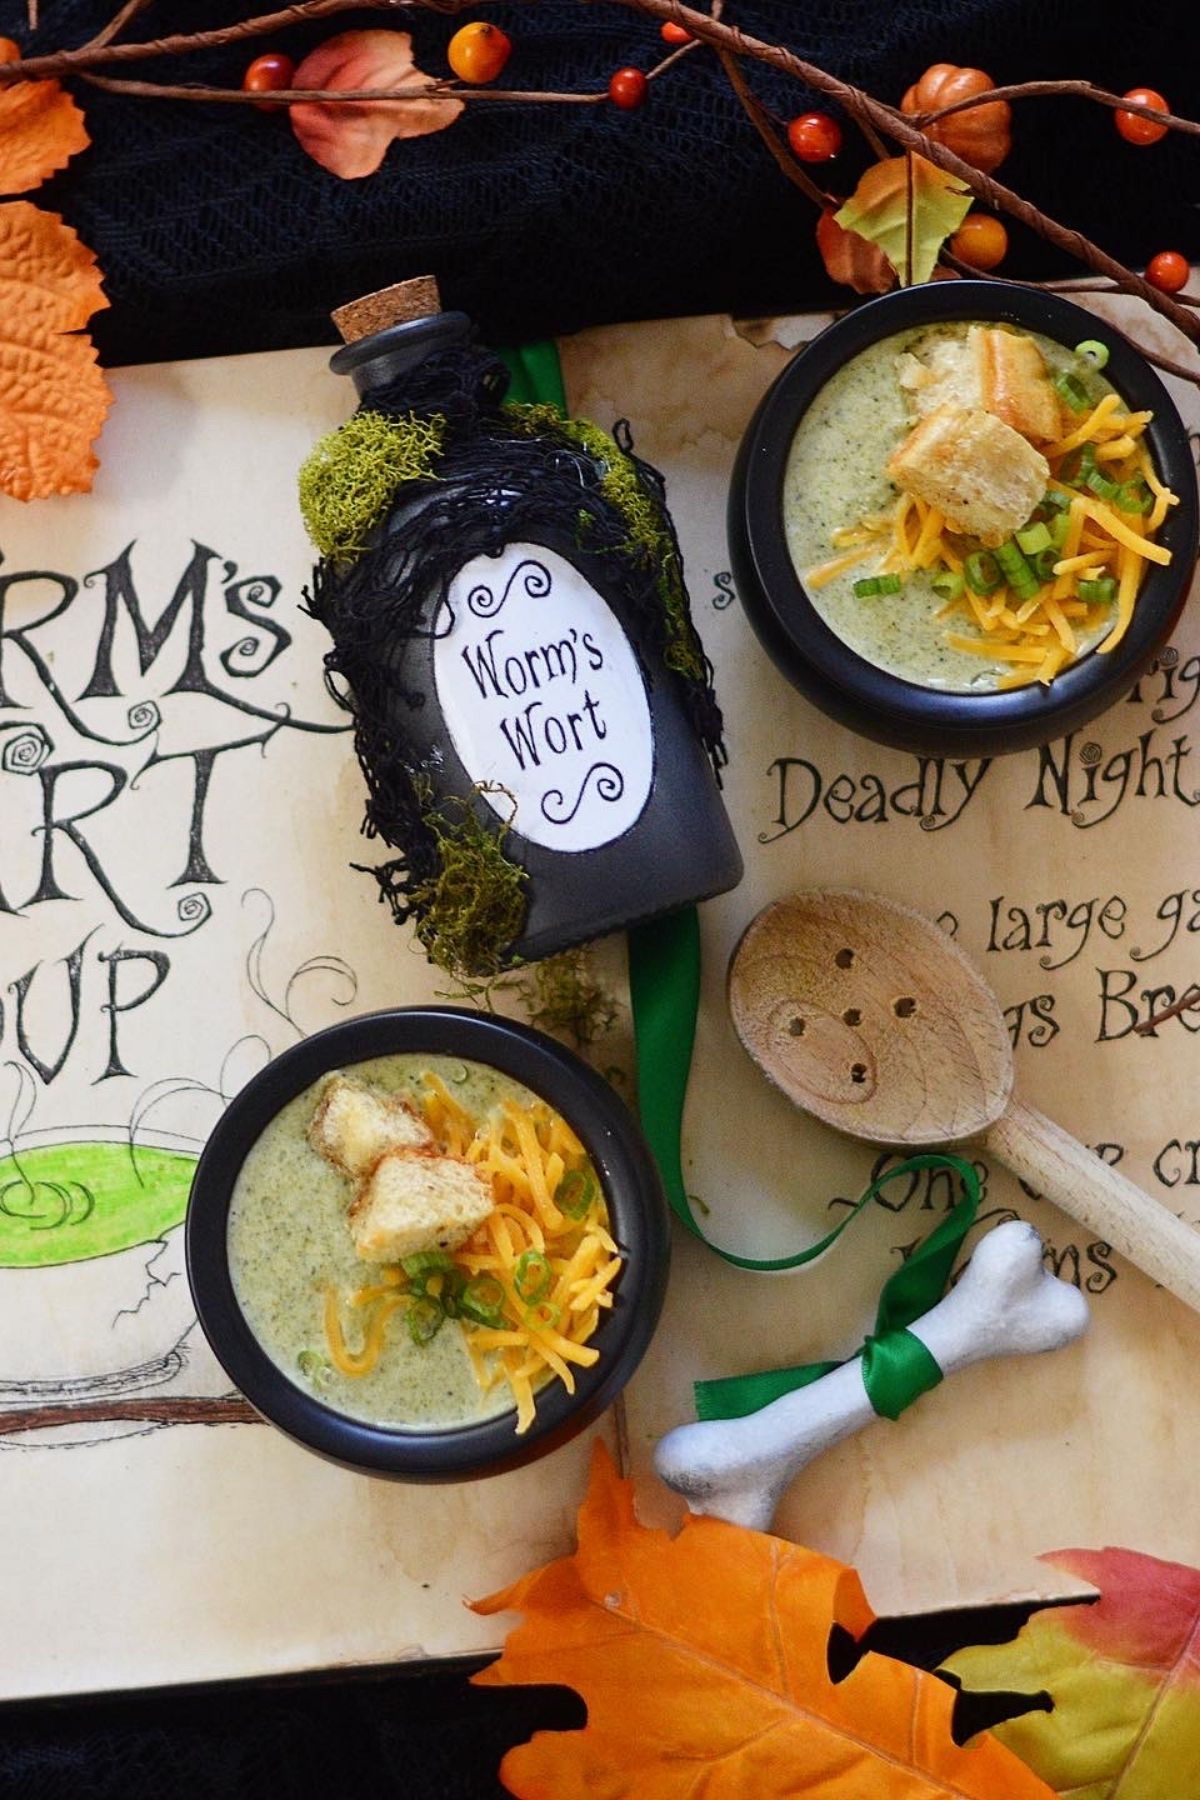 Sally's Worms Wart Soup is a spookishly delicious way to celebrate Halloween season.  This recipe is a fun twist on the traditional broccoli cheddar soup.  